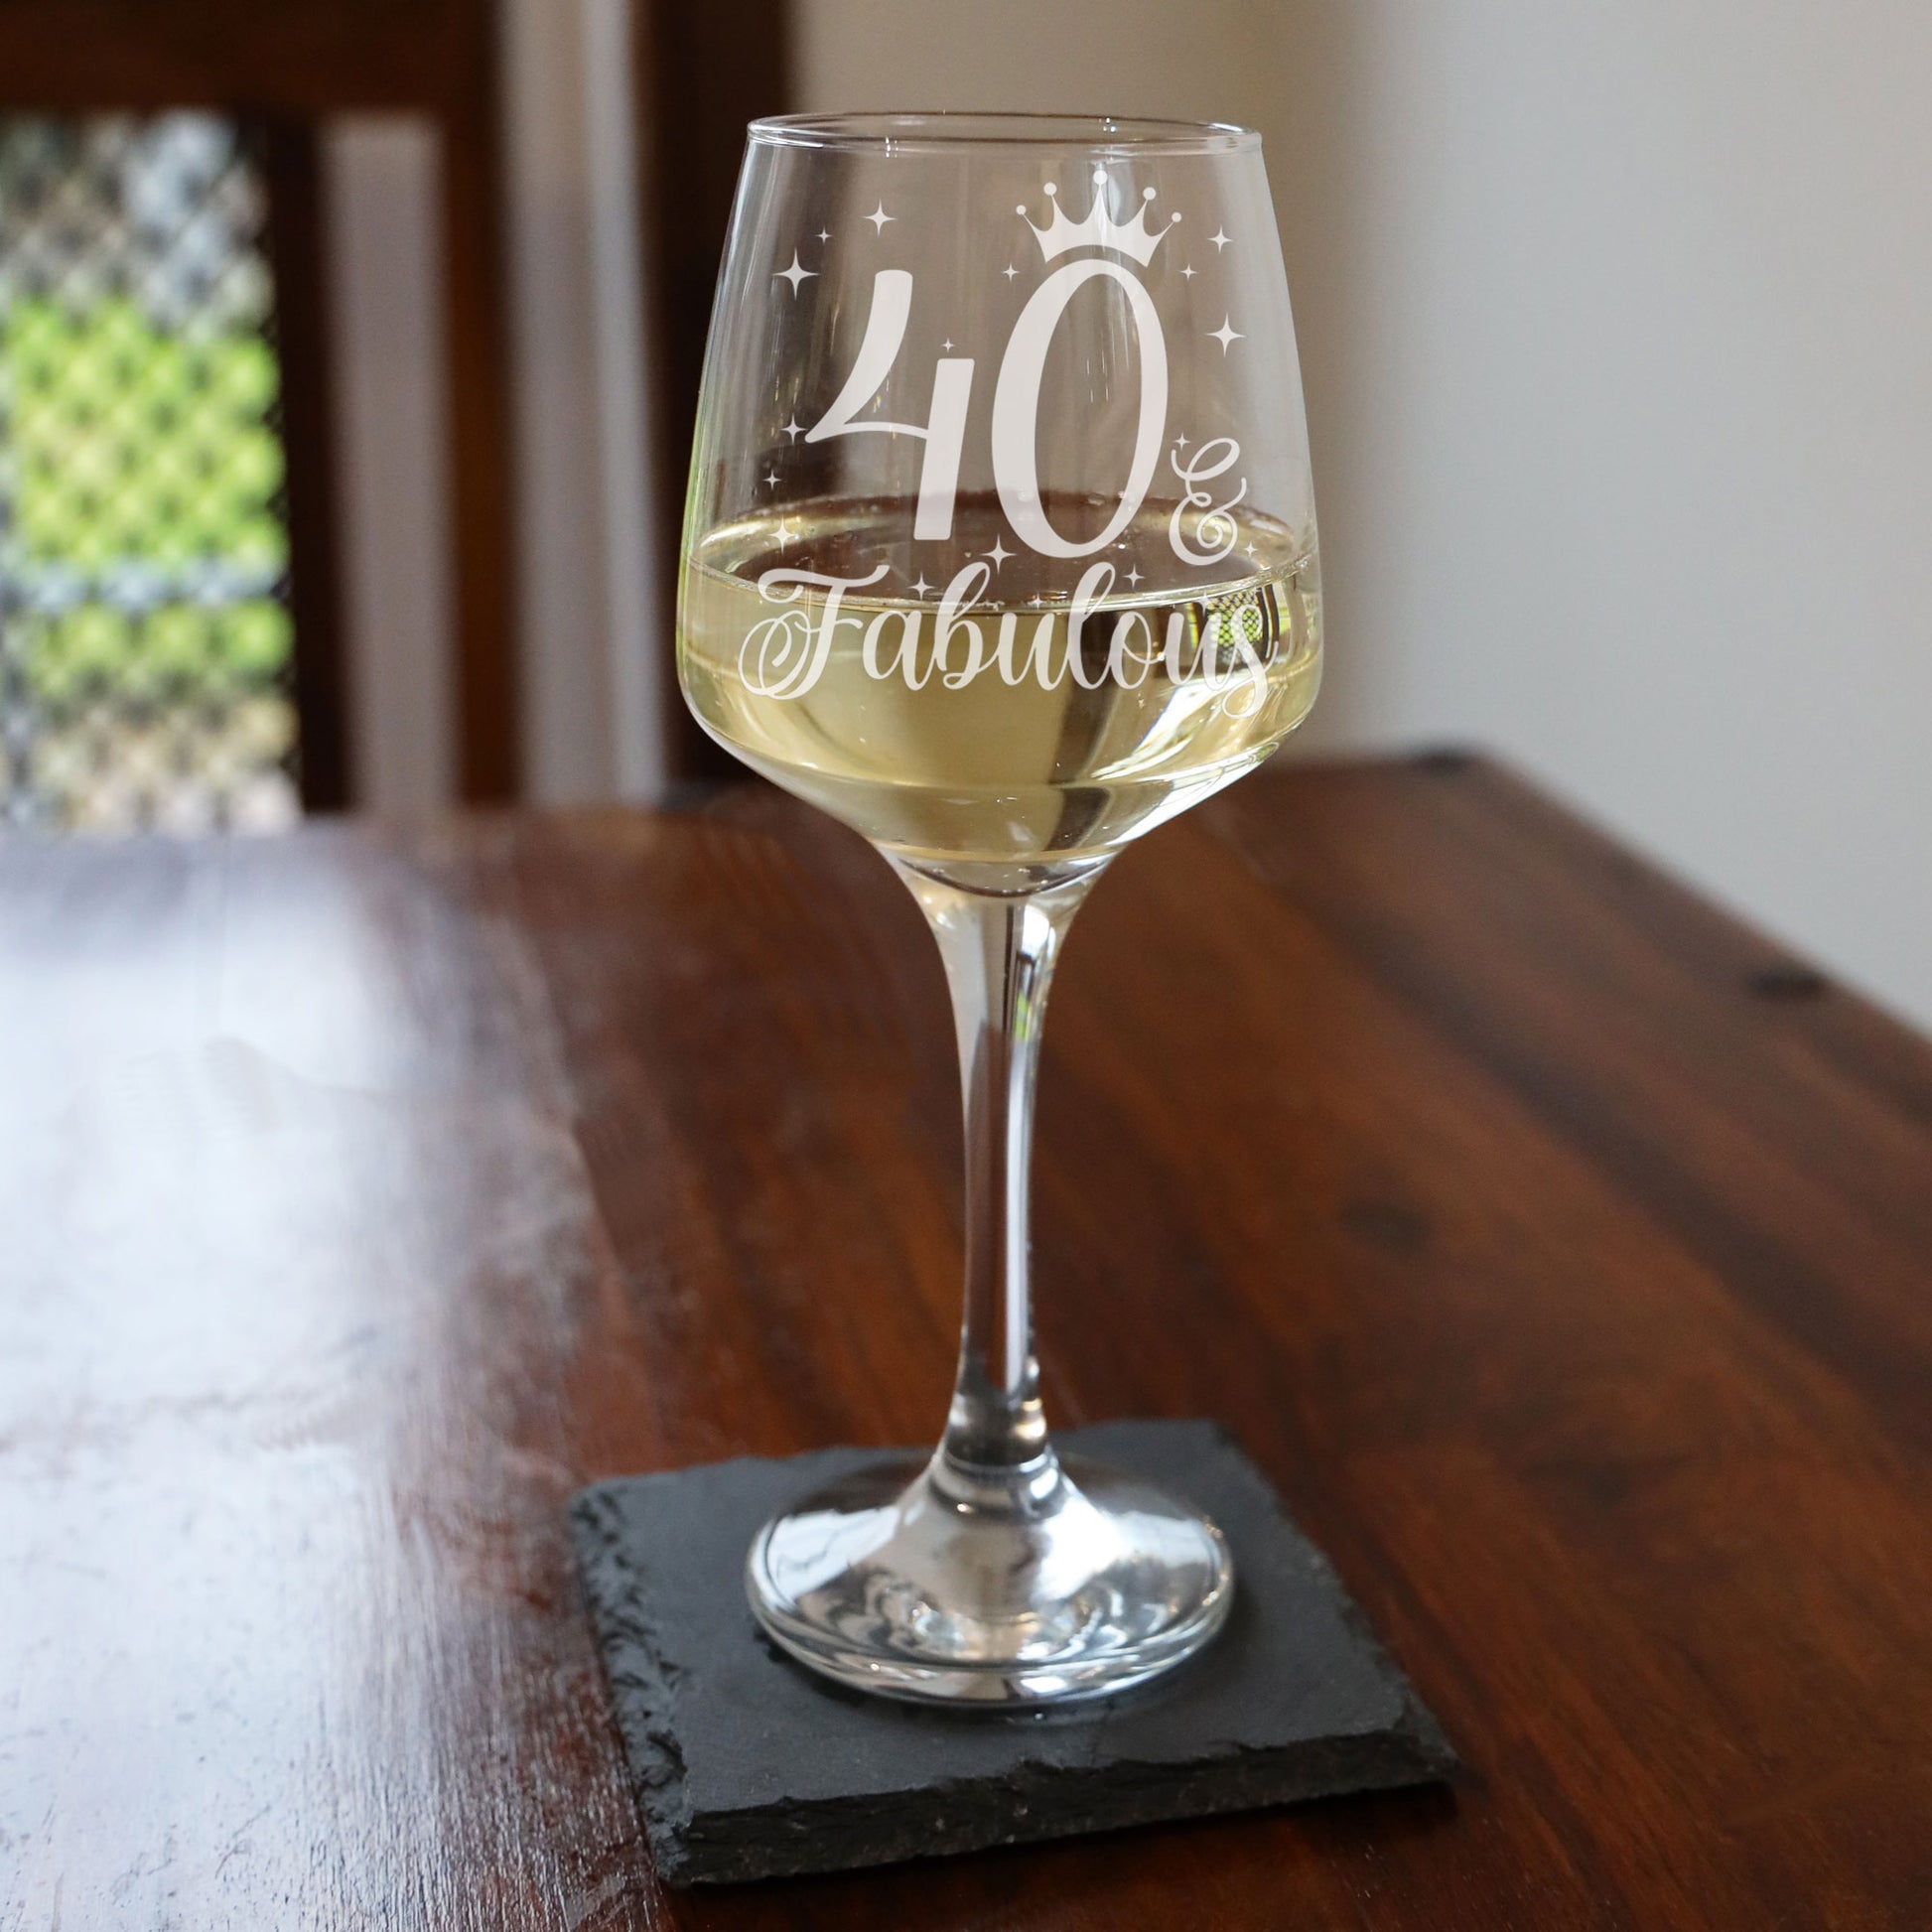 40 & Fabulous 40th Birthday Gift Engraved Wine Glass and/or Coaster Set  - Always Looking Good - Wine Glass Only  